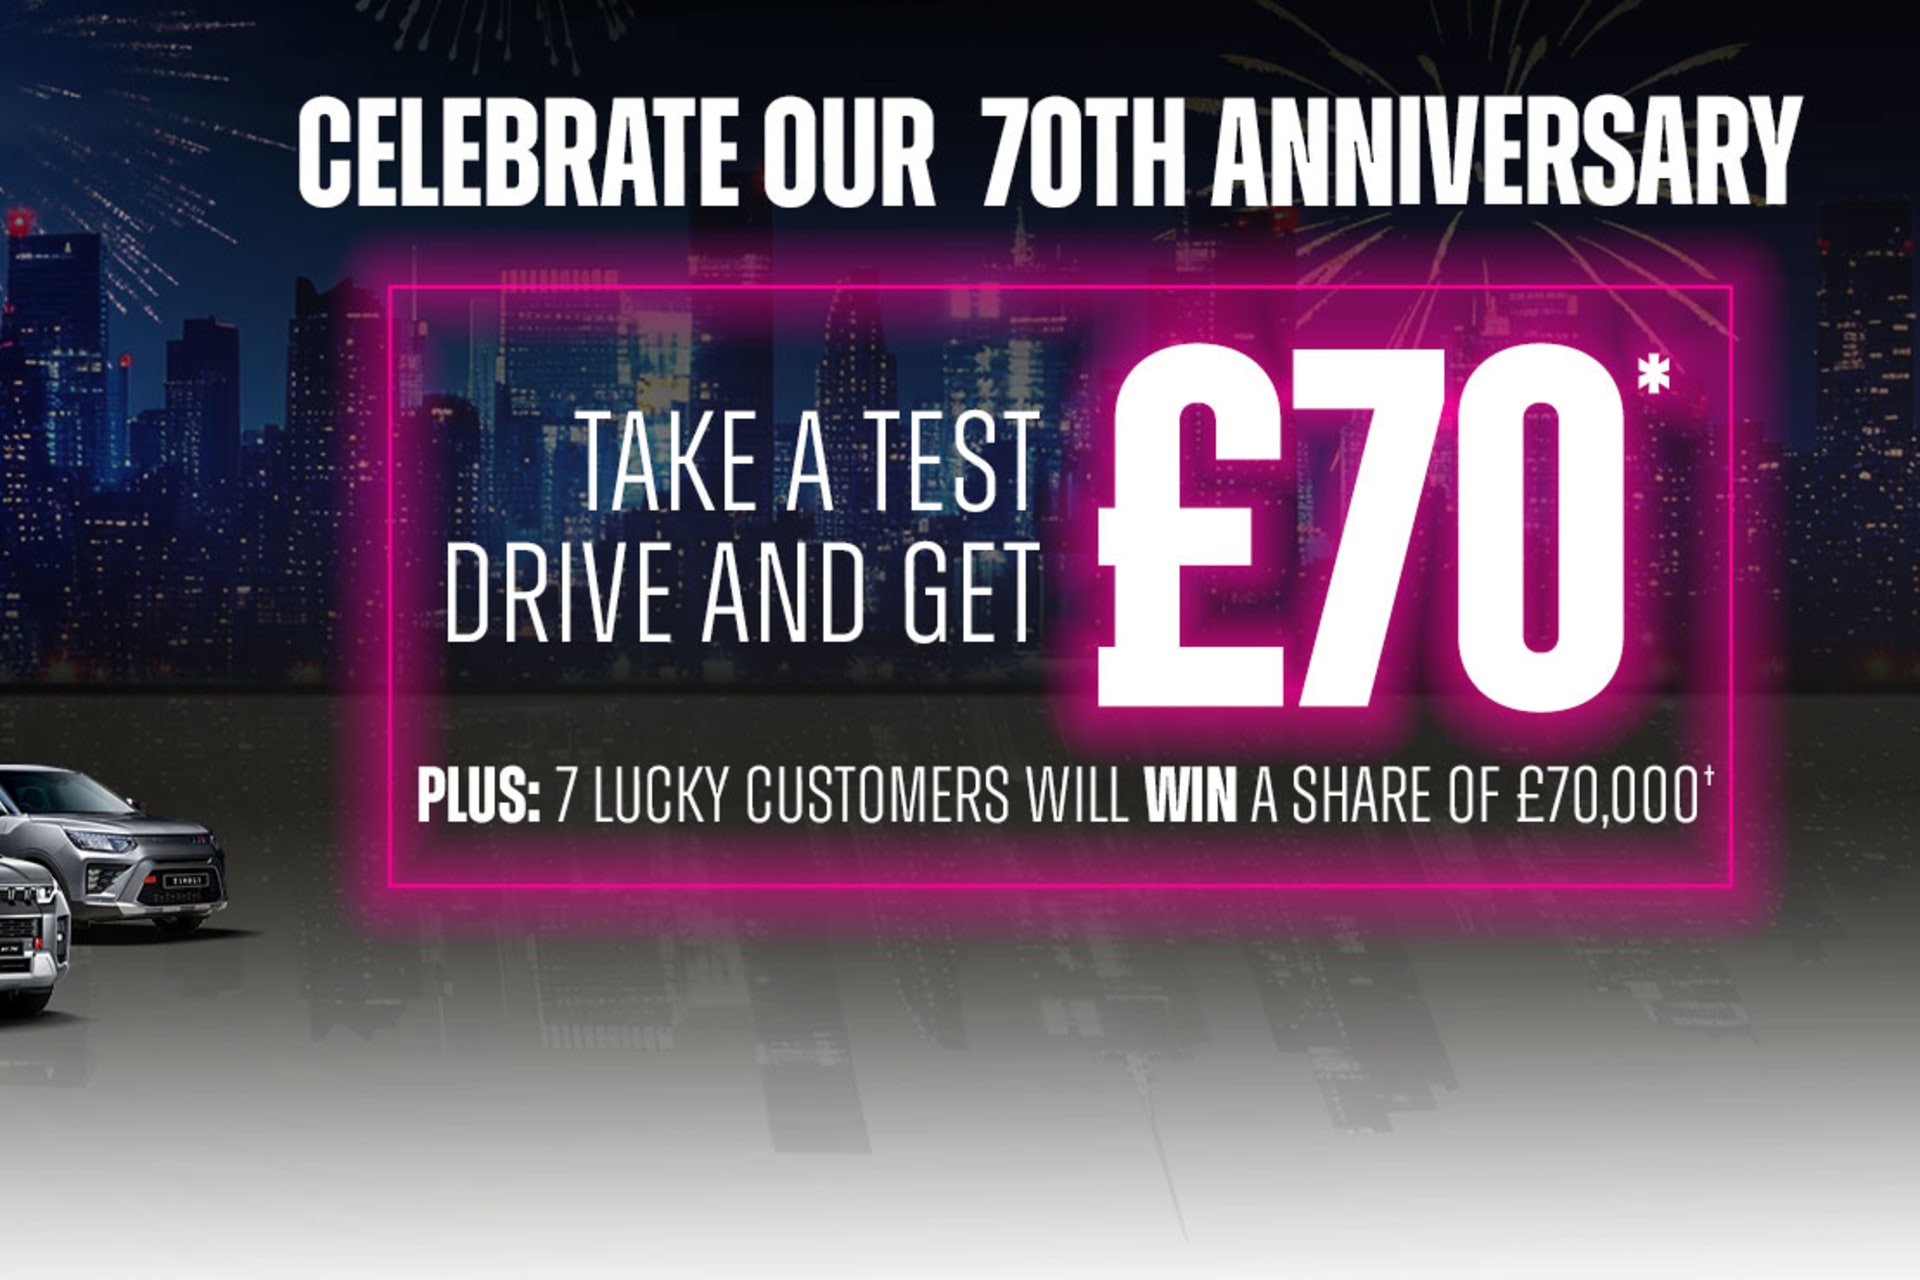 Test drive and get £70